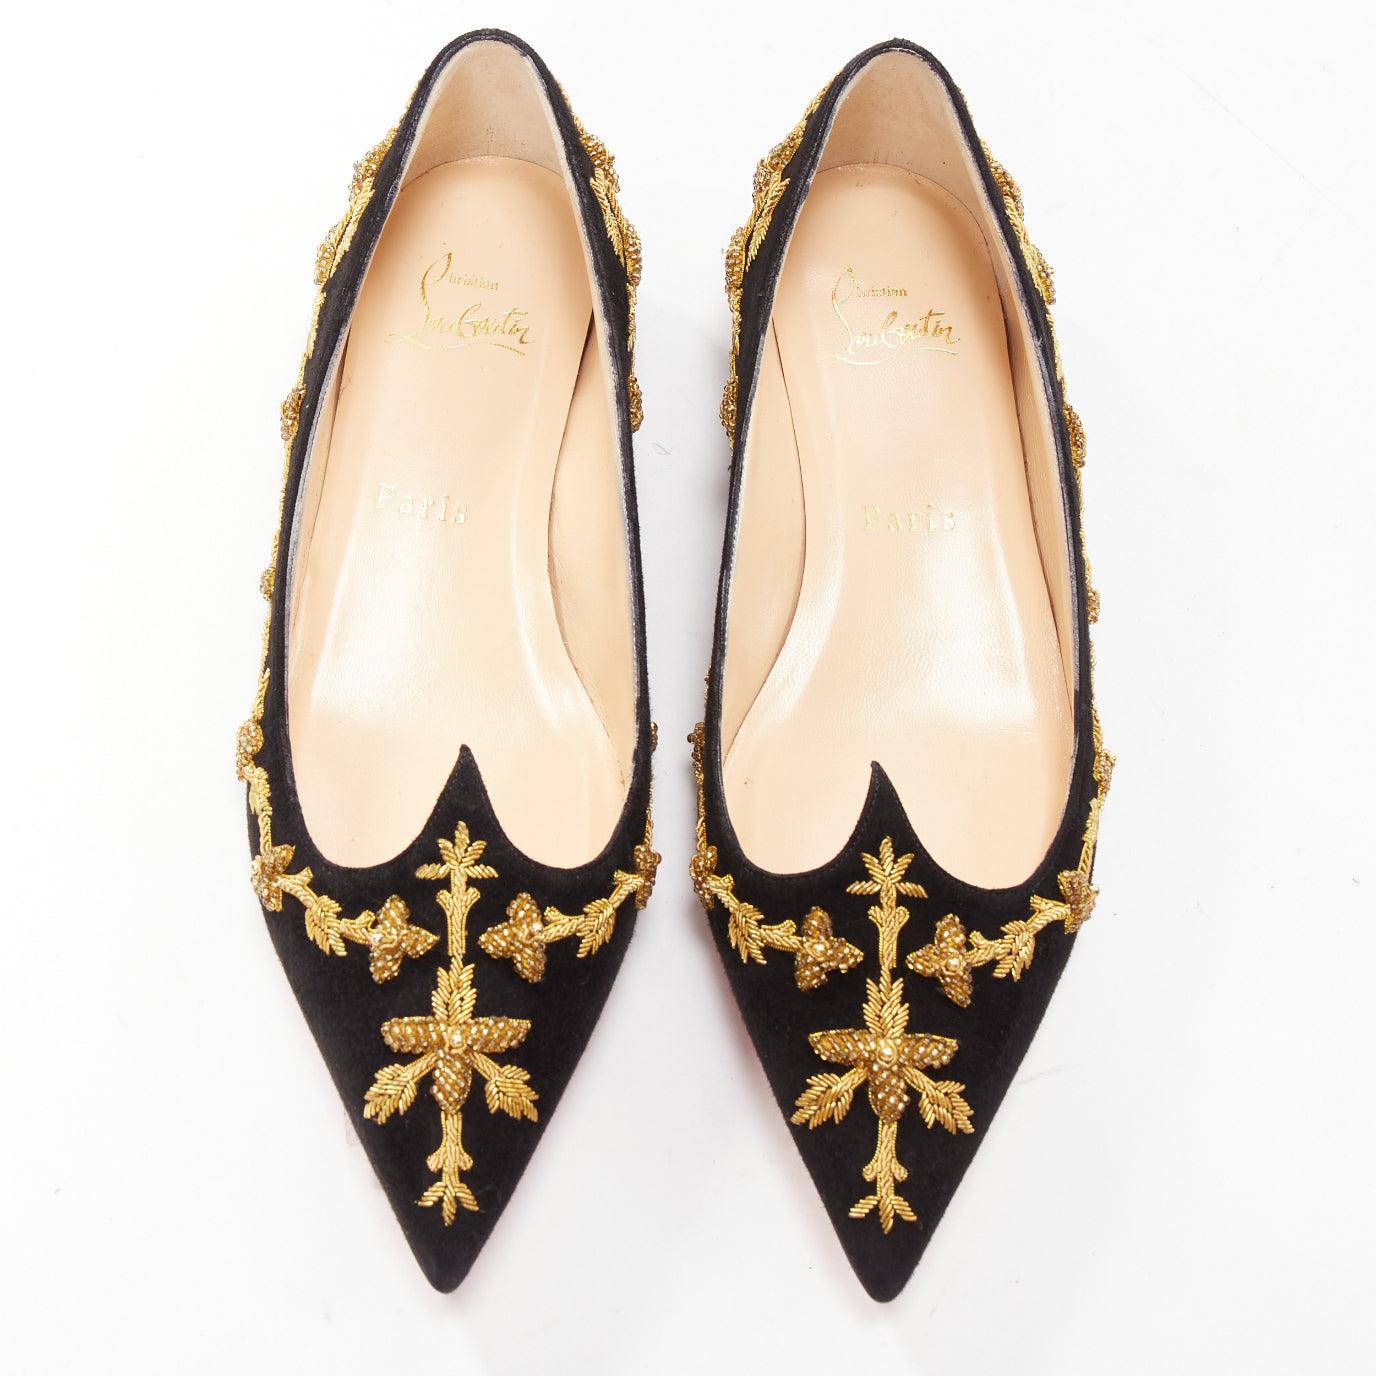 CHRISTIAN LOUBOUTIN black gold embroidery suede leather pointy flats EU35.5
Reference: YIKK/A00079
Brand: Christian Louboutin
Material: Suede
Color: Black, Gold
Pattern: Barocco
Closure: Slip On
Lining: Nude Leather
Made in: